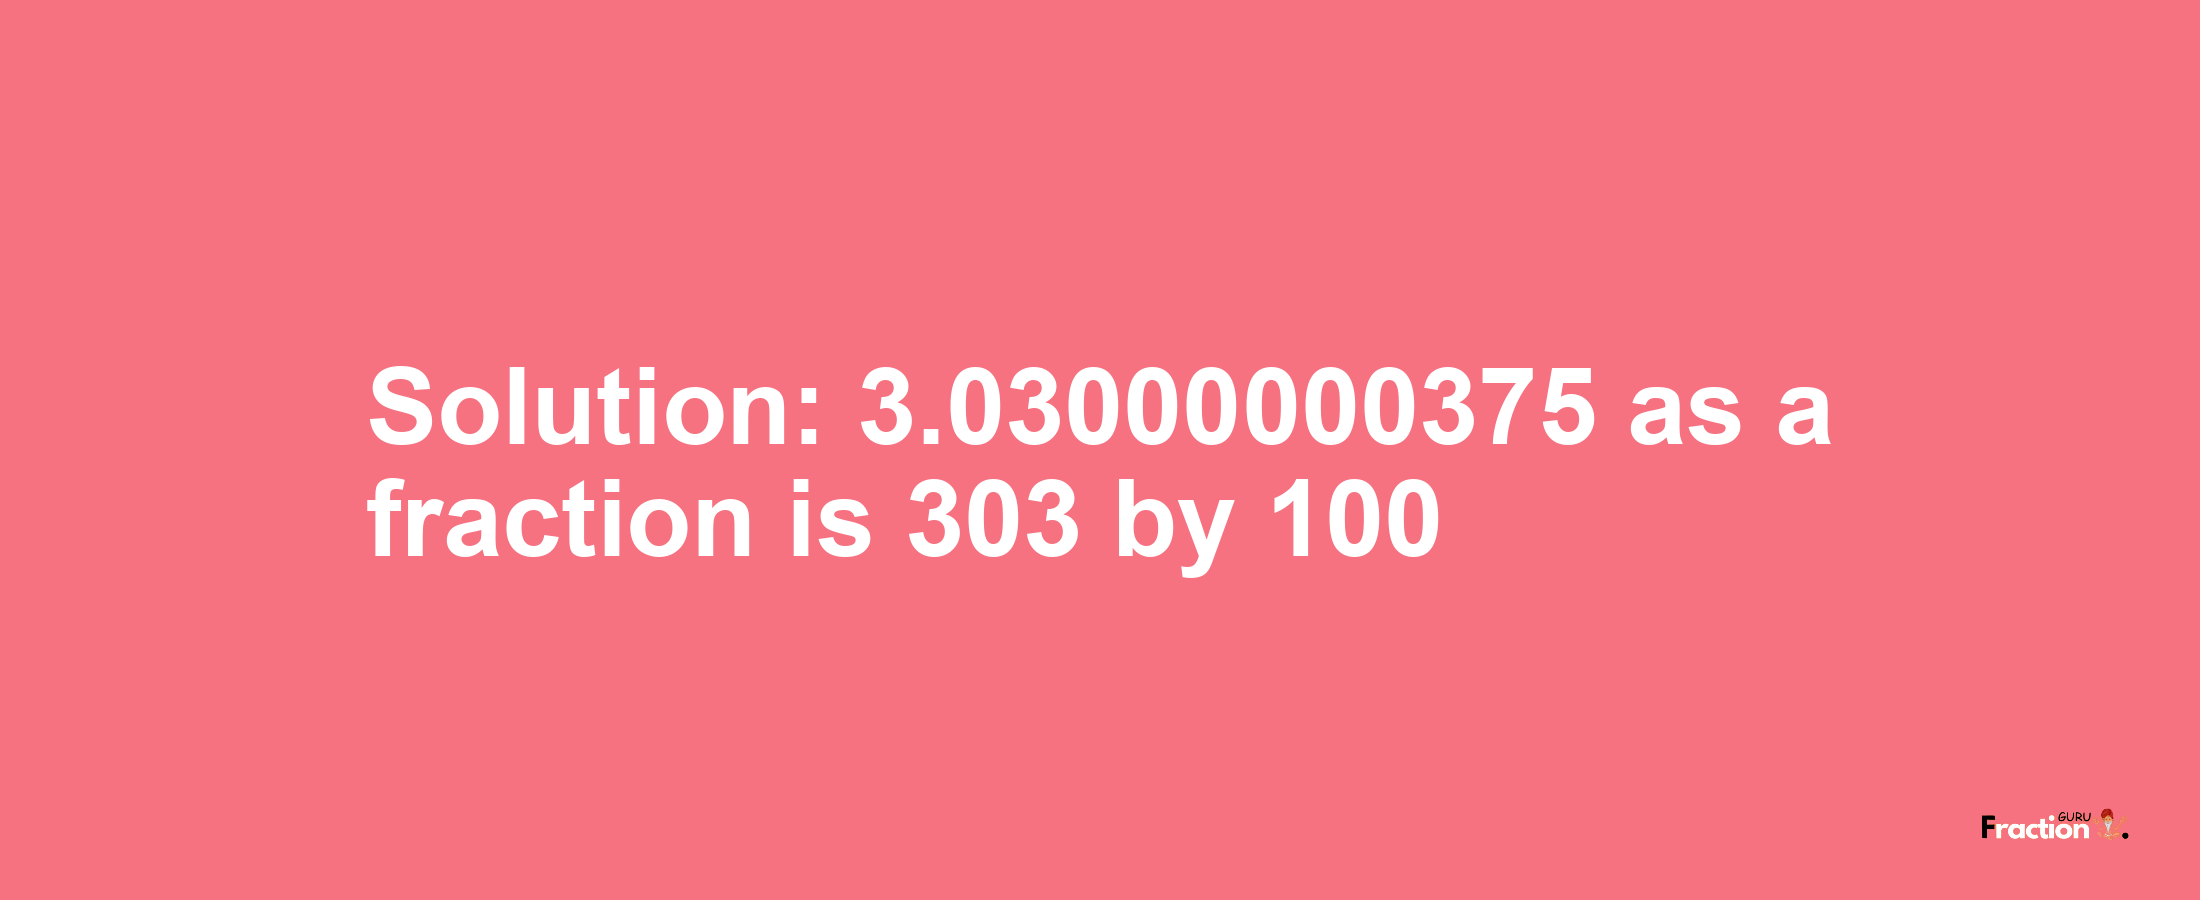 Solution:3.03000000375 as a fraction is 303/100